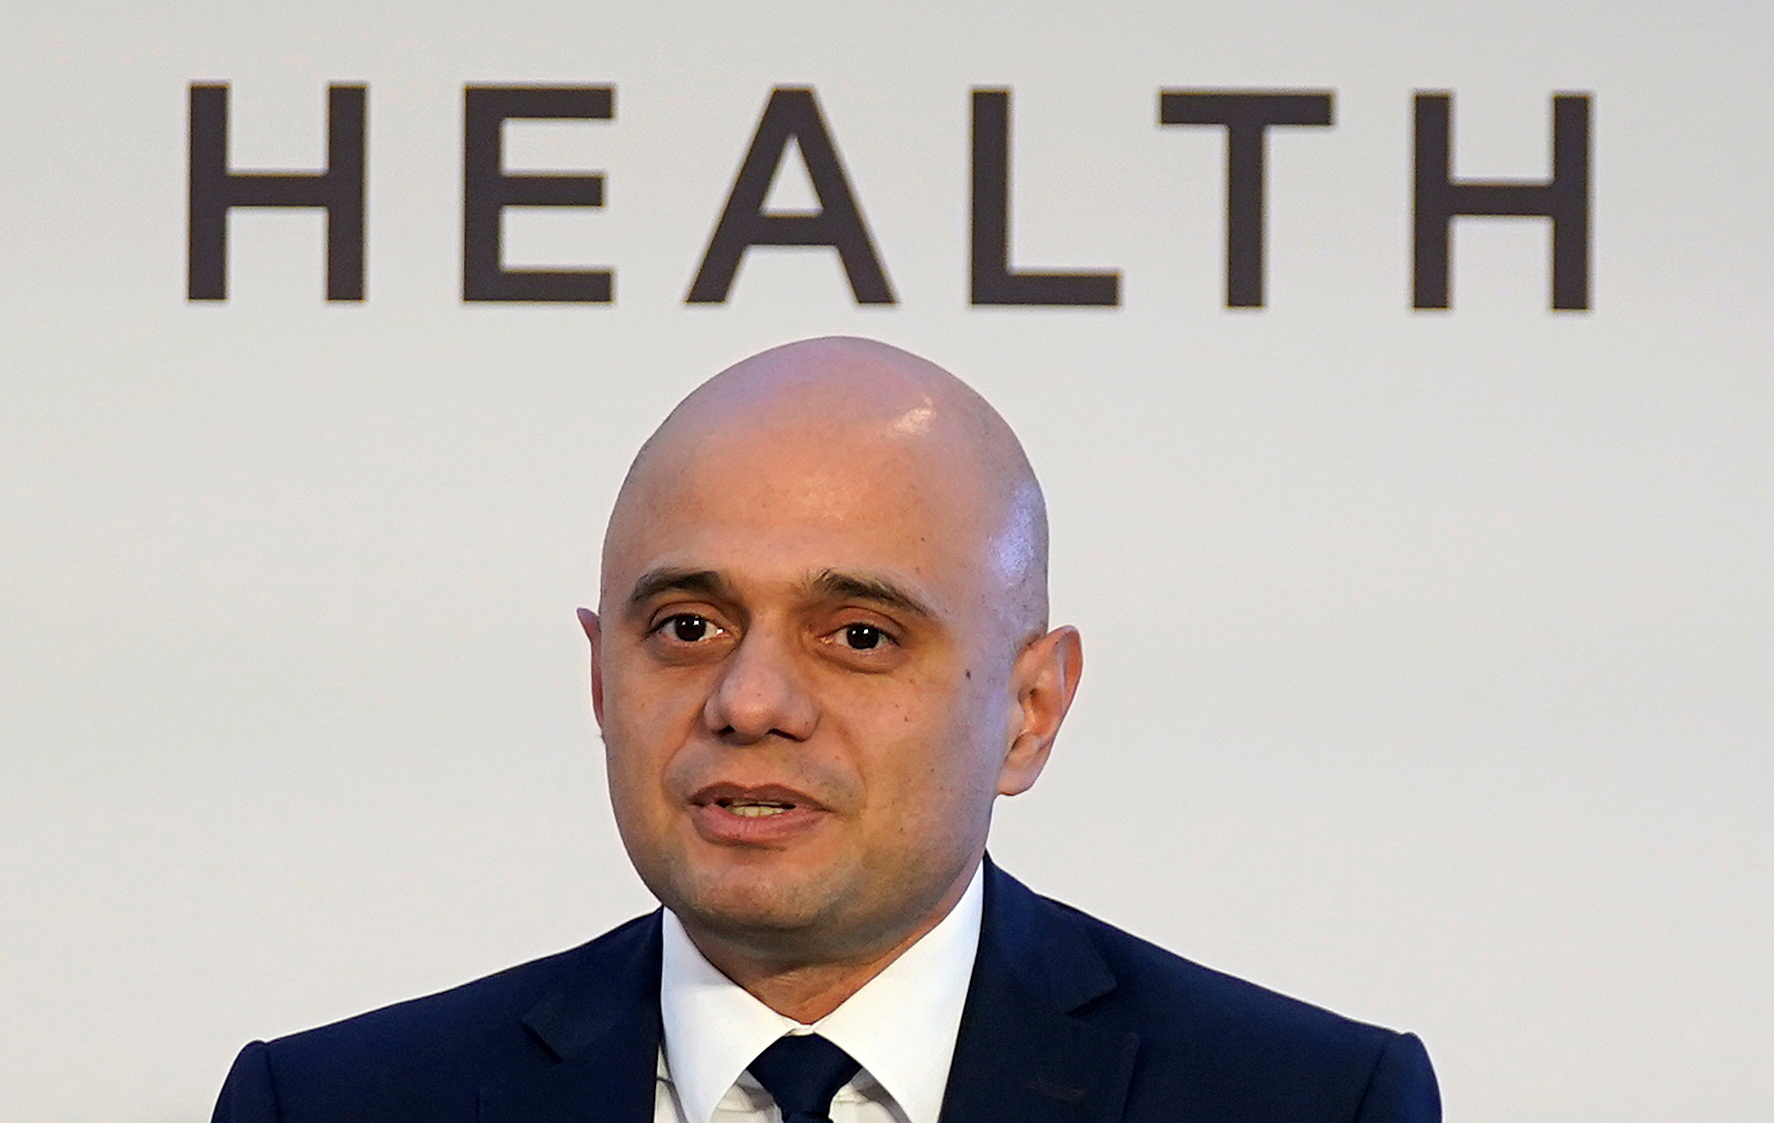 Britain's Health and Social Care Secretary Sajid Javid speaks during the Royal Foundation's Emergency Services Mental Health Symposium in London, Britain November 25, 2021. Andrew Matthews/Pool via REUTERS/File Photo